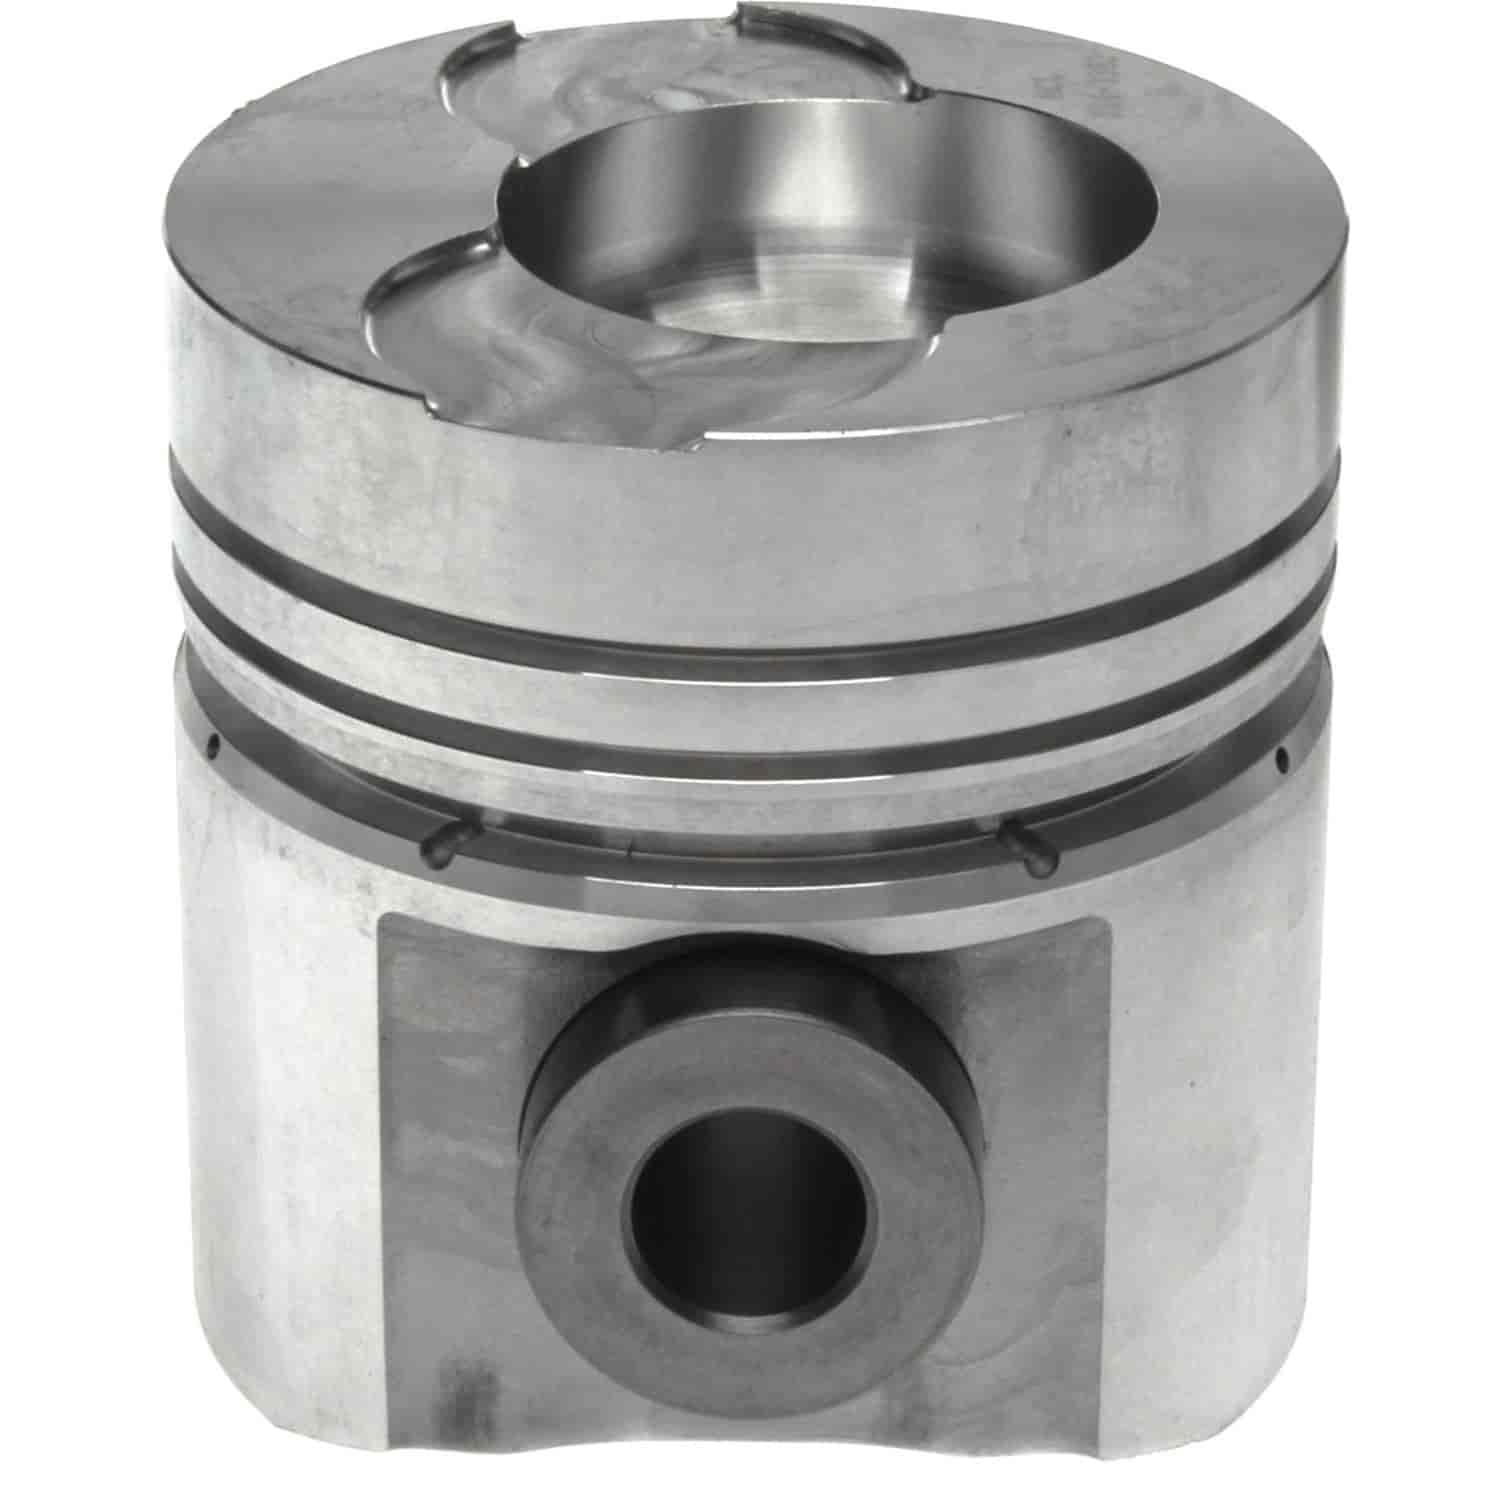 Cylinder Sleeve Assembly Komatsu 105MM Bore 4D105-5H 5J 5T-6D105-1 with 6136322110 .